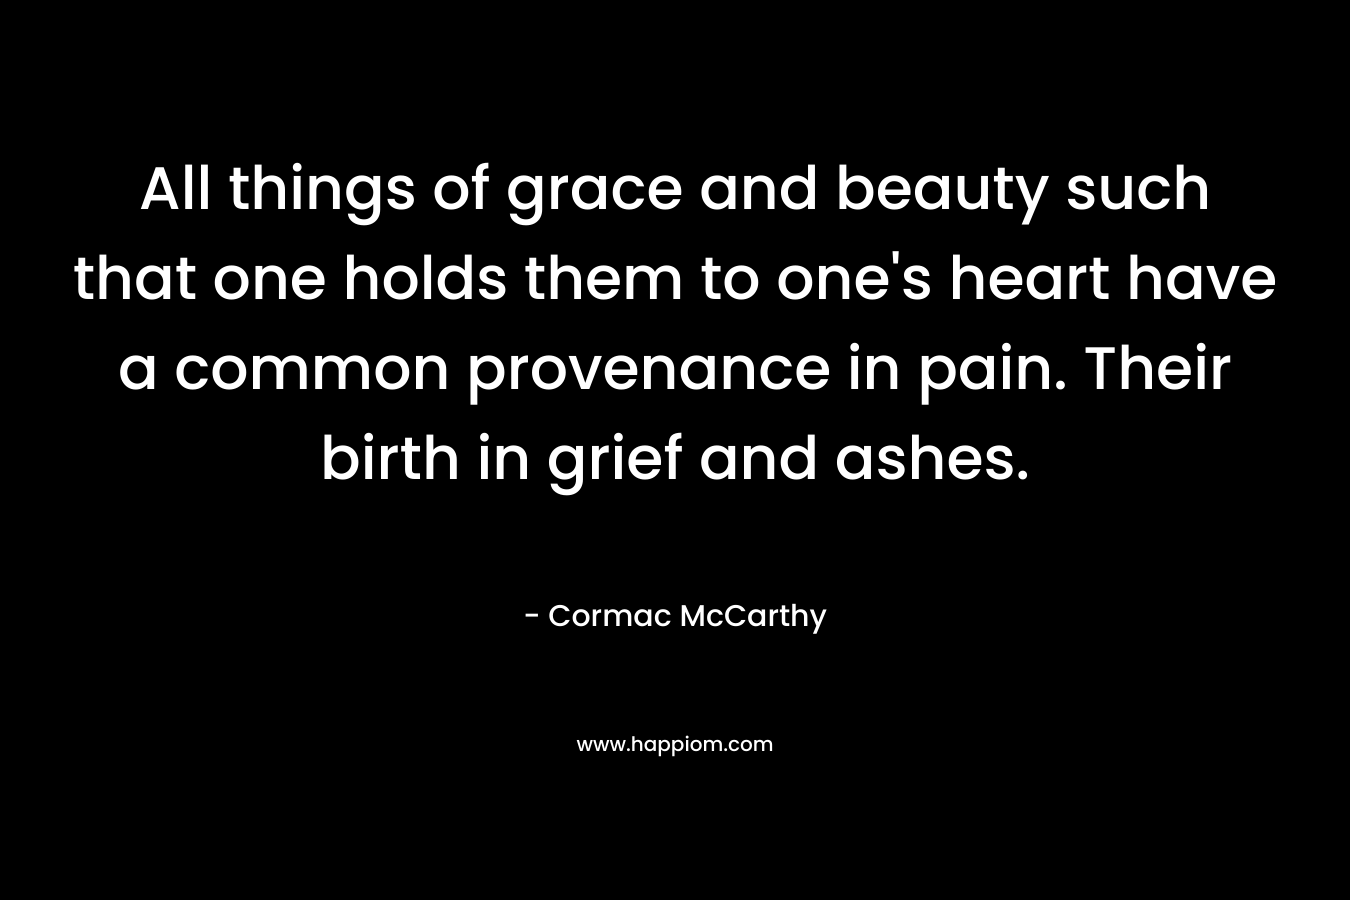 All things of grace and beauty such that one holds them to one's heart have a common provenance in pain. Their birth in grief and ashes.